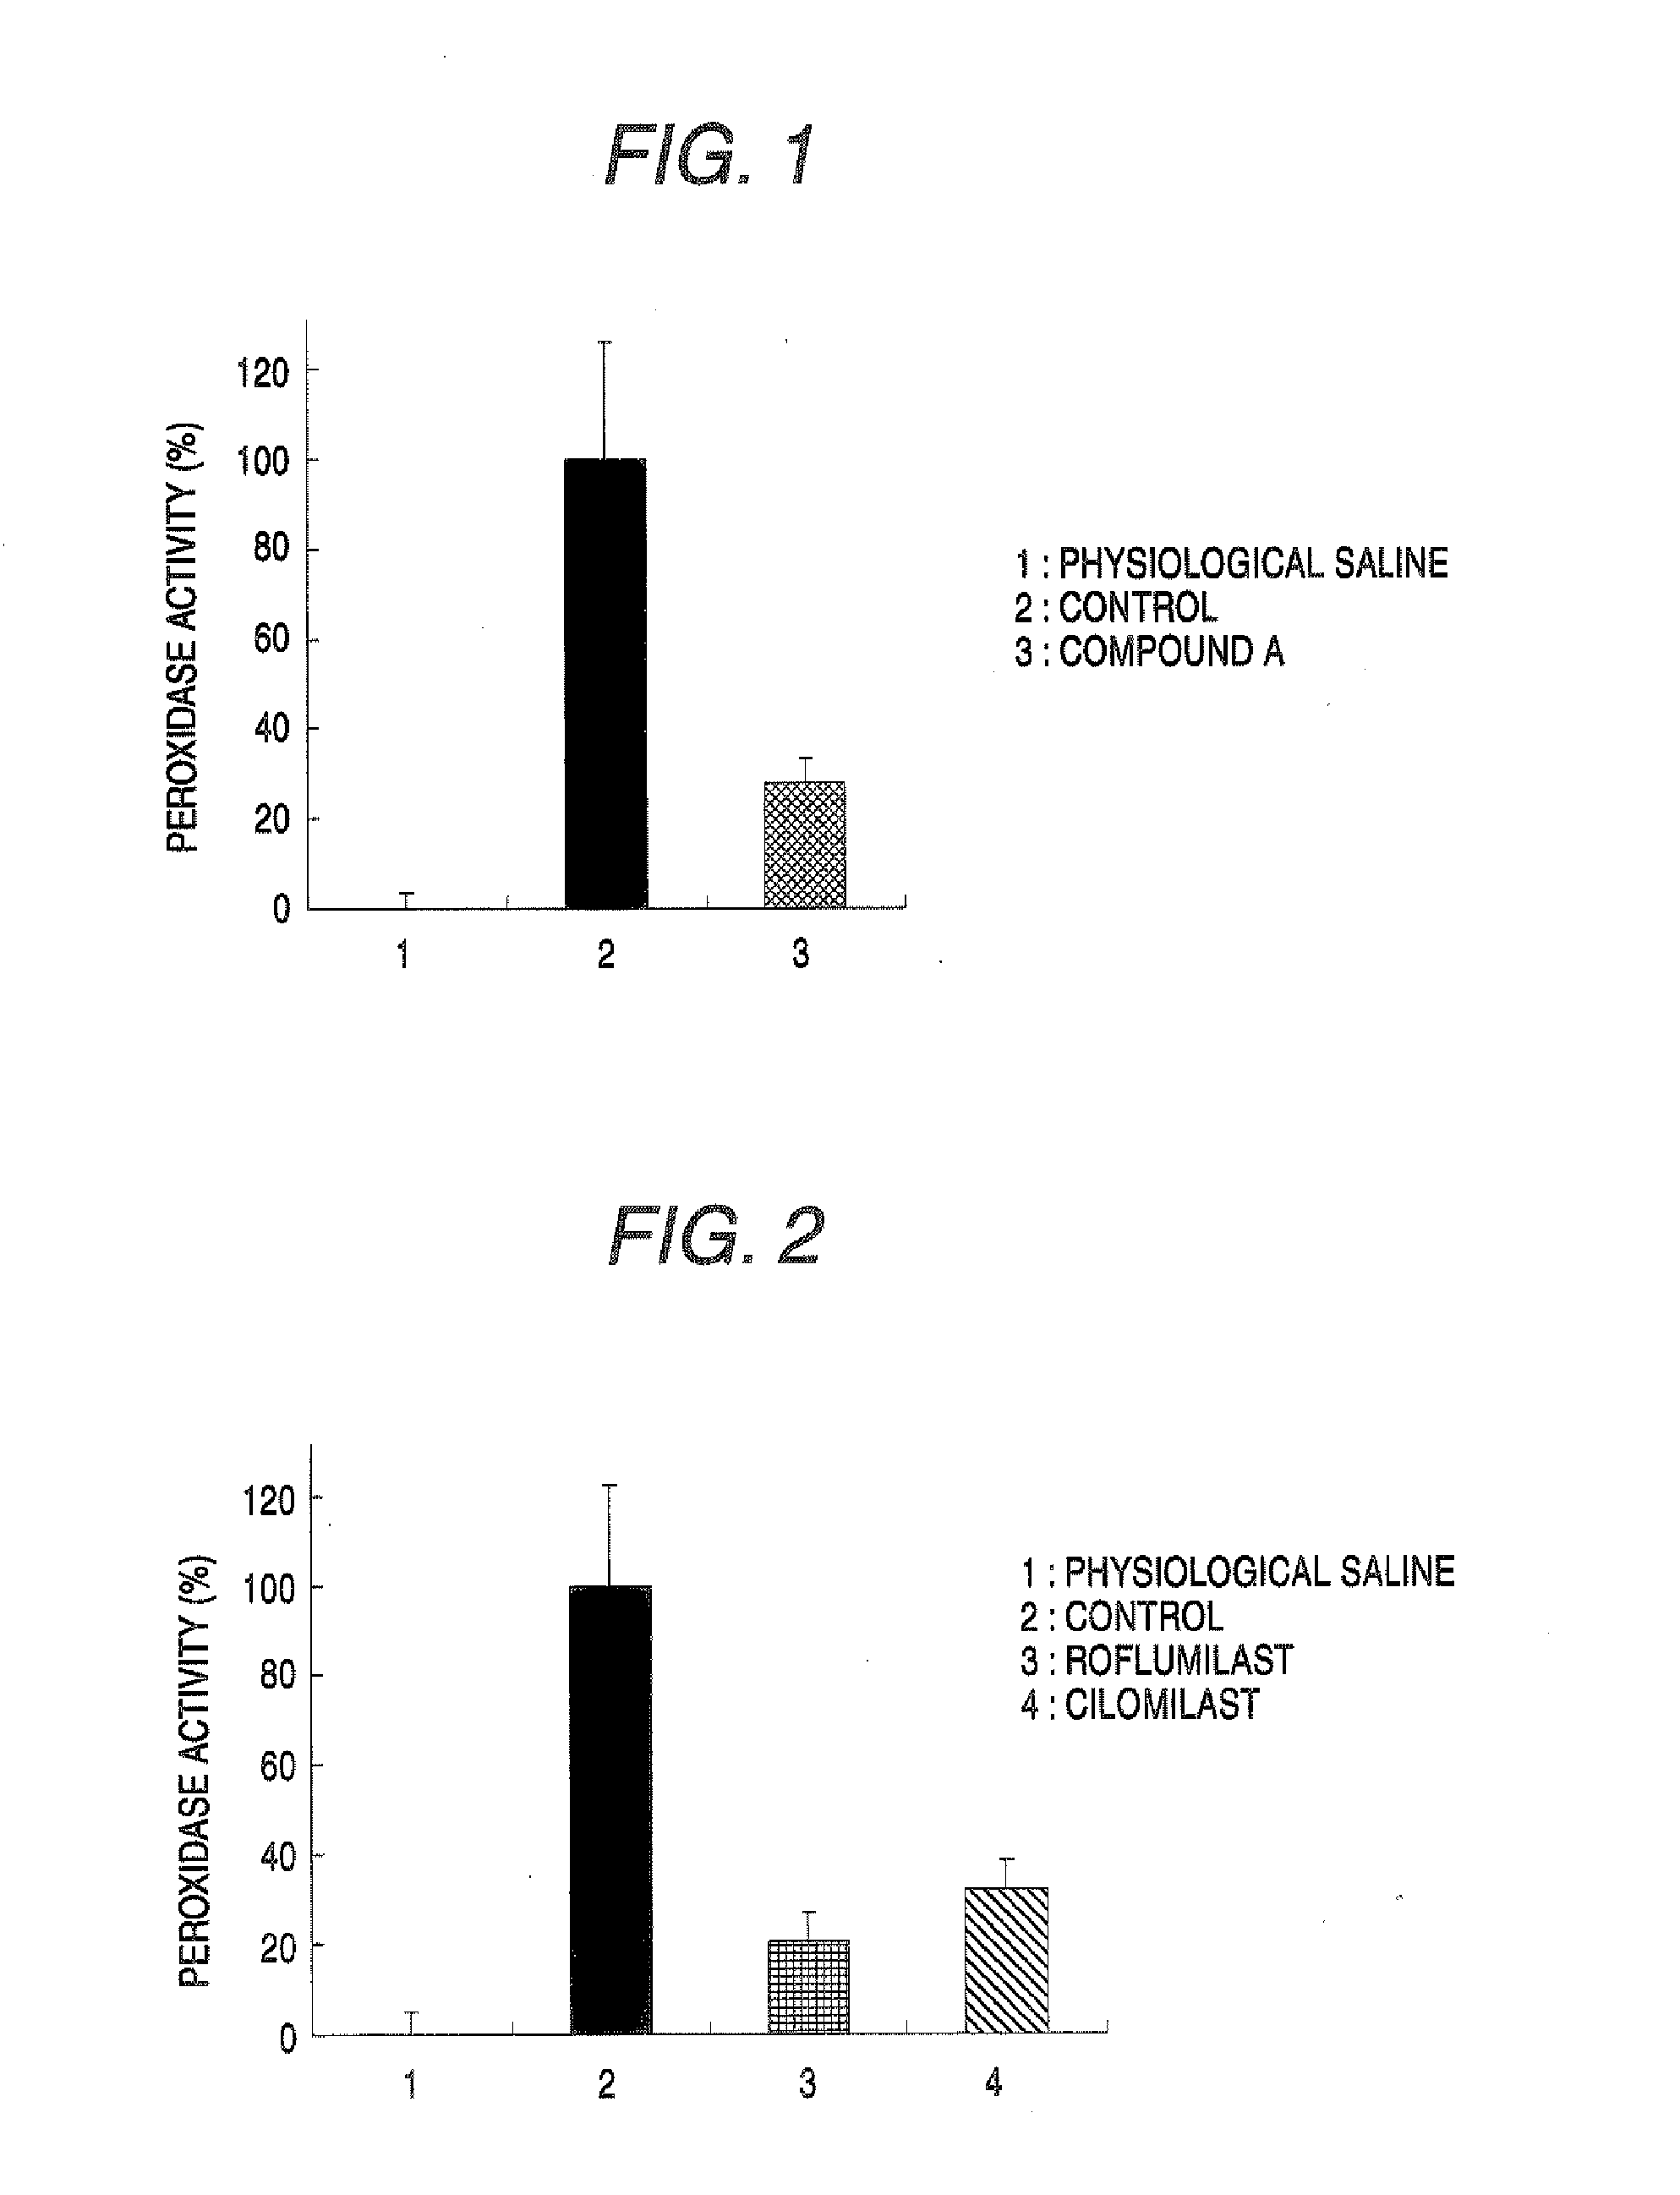 Agent for treating chronic pelvic pain syndrome